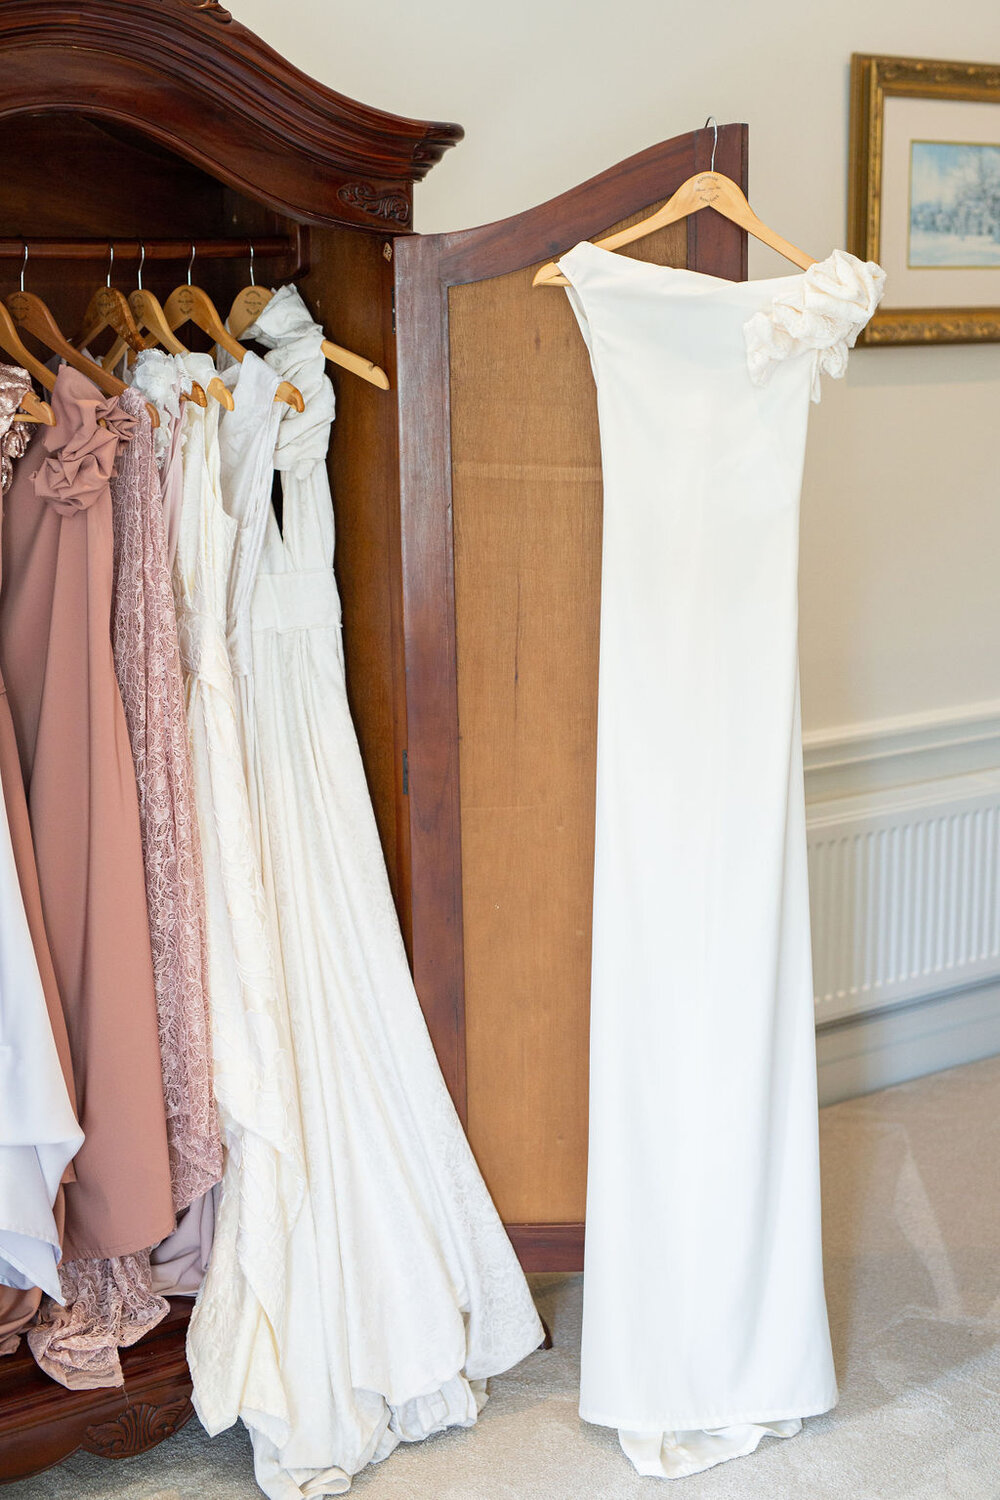 Blonde and Wise White Dress in the Wardrobe.jpg